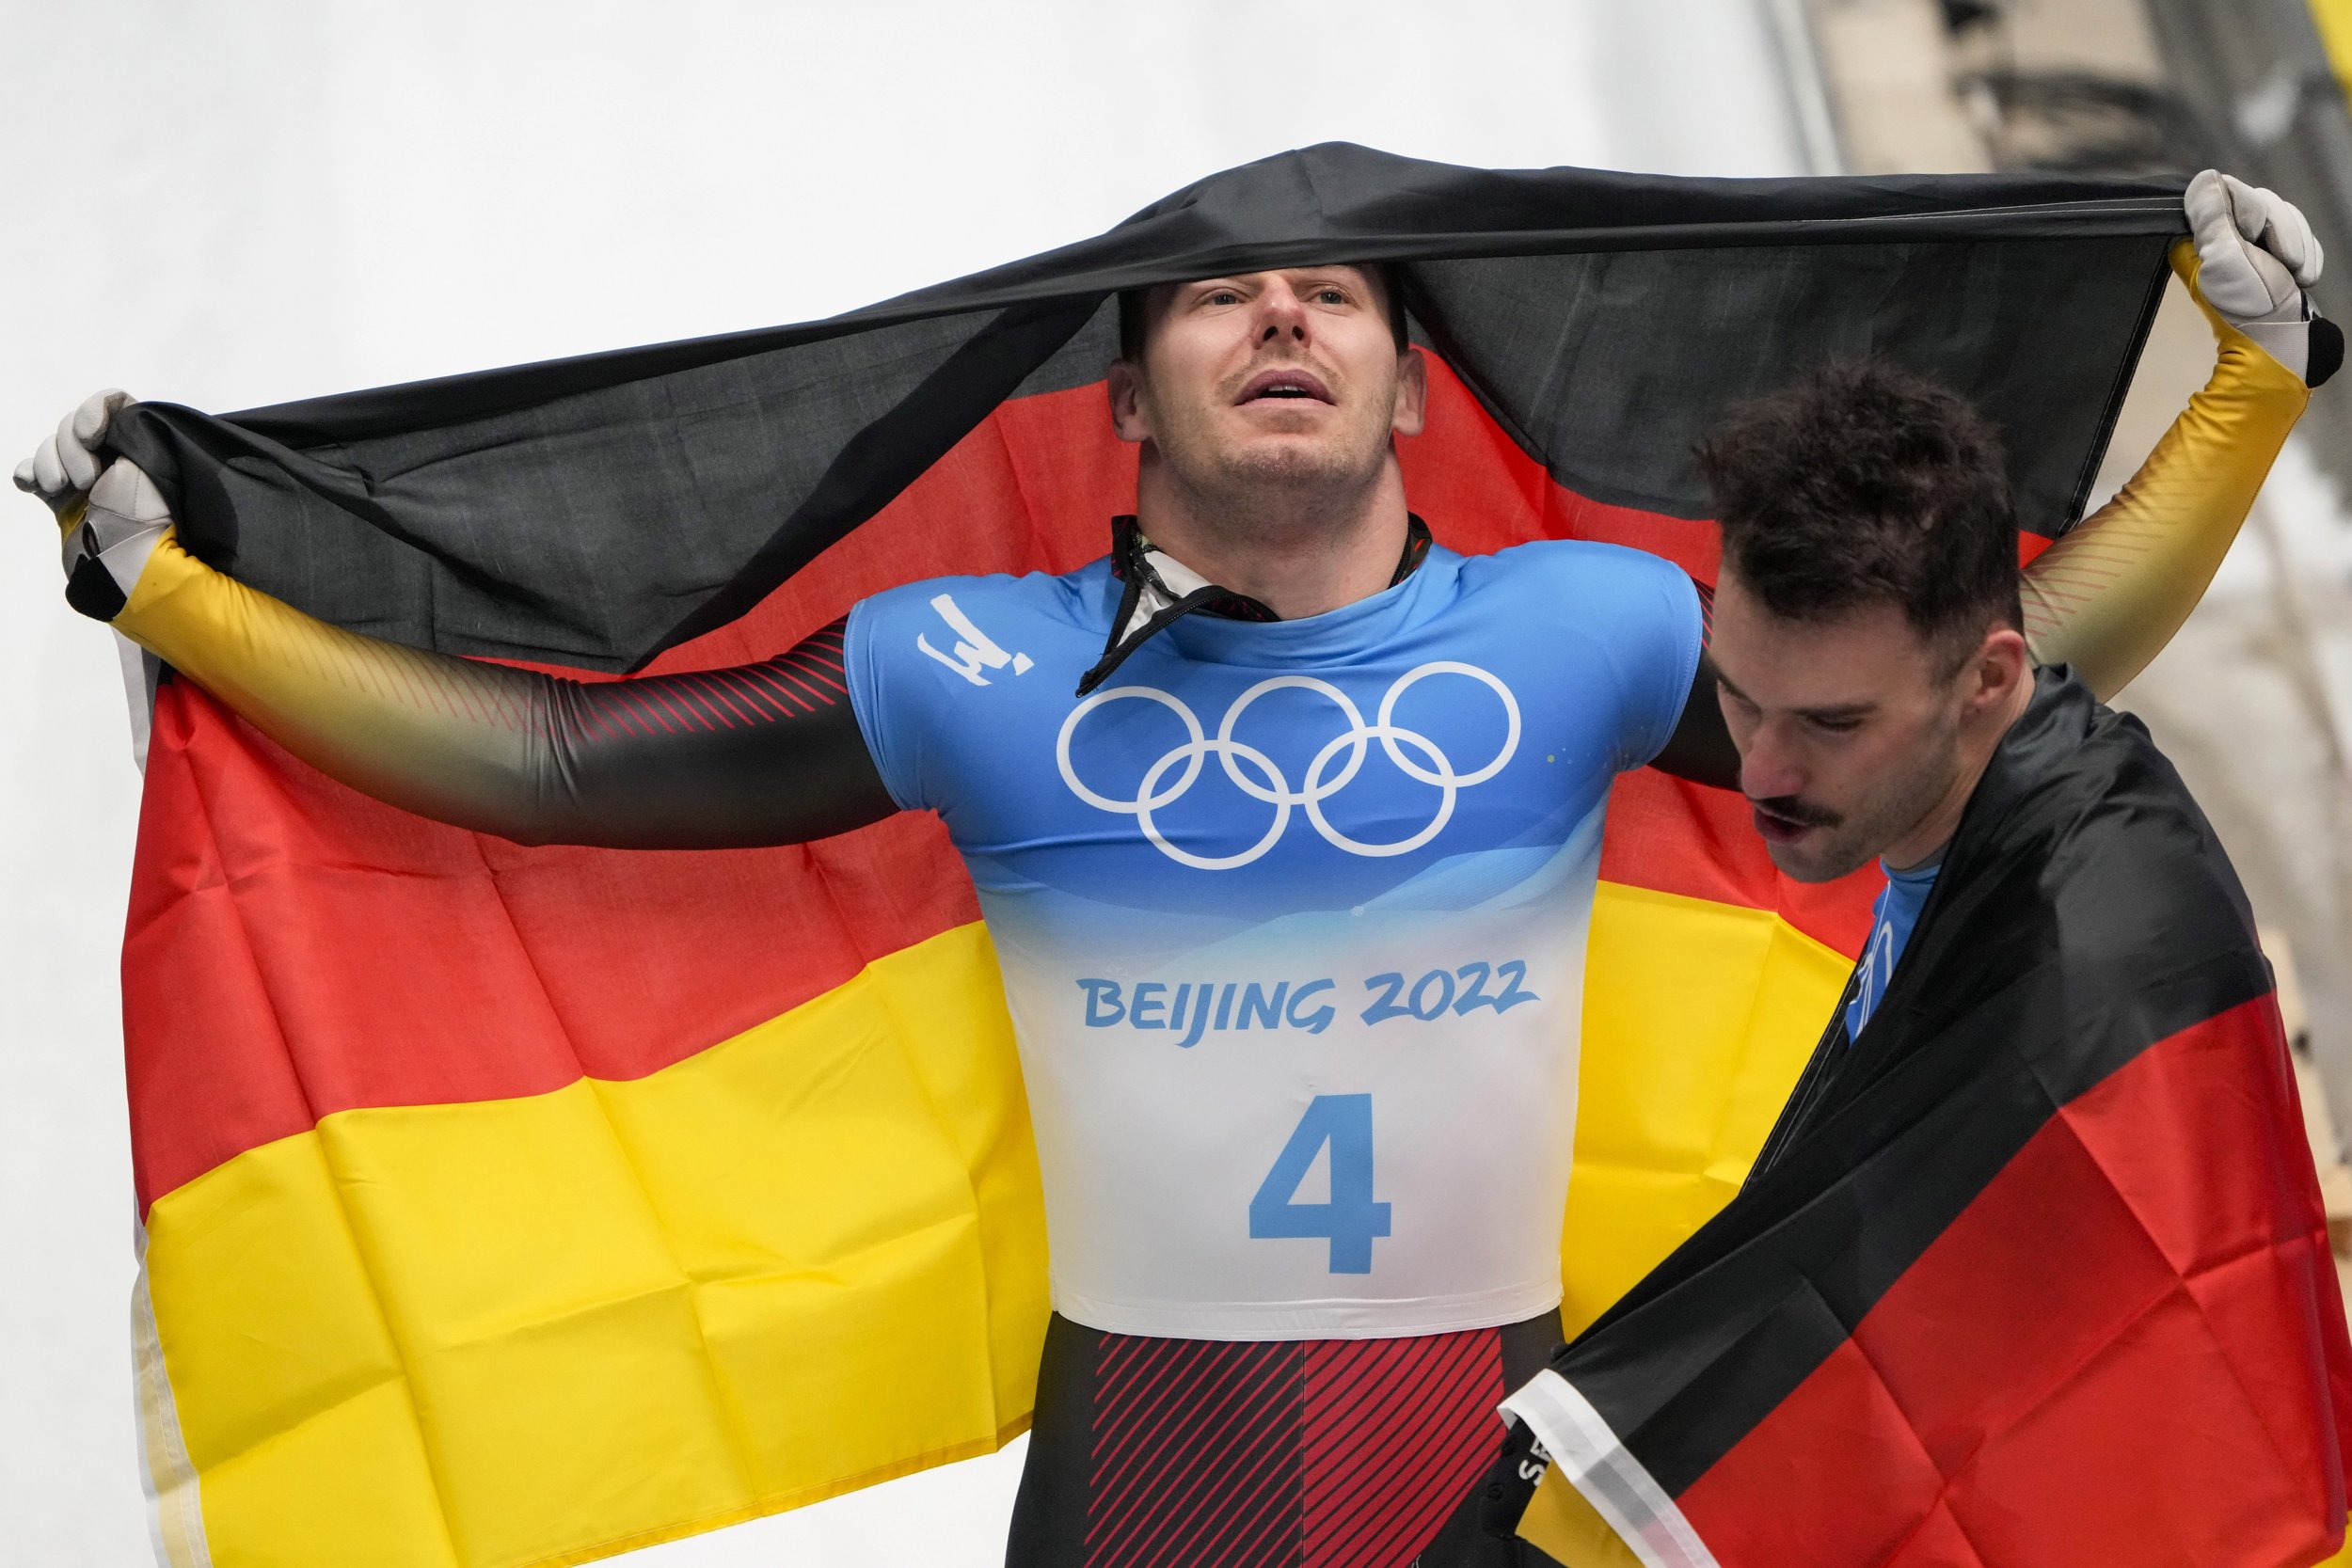  Christopher Grotheer, of Germany, celebrates winning the gold medal in the men's skeleton at the 2022 Winter Olympics, Friday, Feb. 11, 2022, in the Yanqing district of Beijing. (AP Photo/Dmitri Lovetsky) 